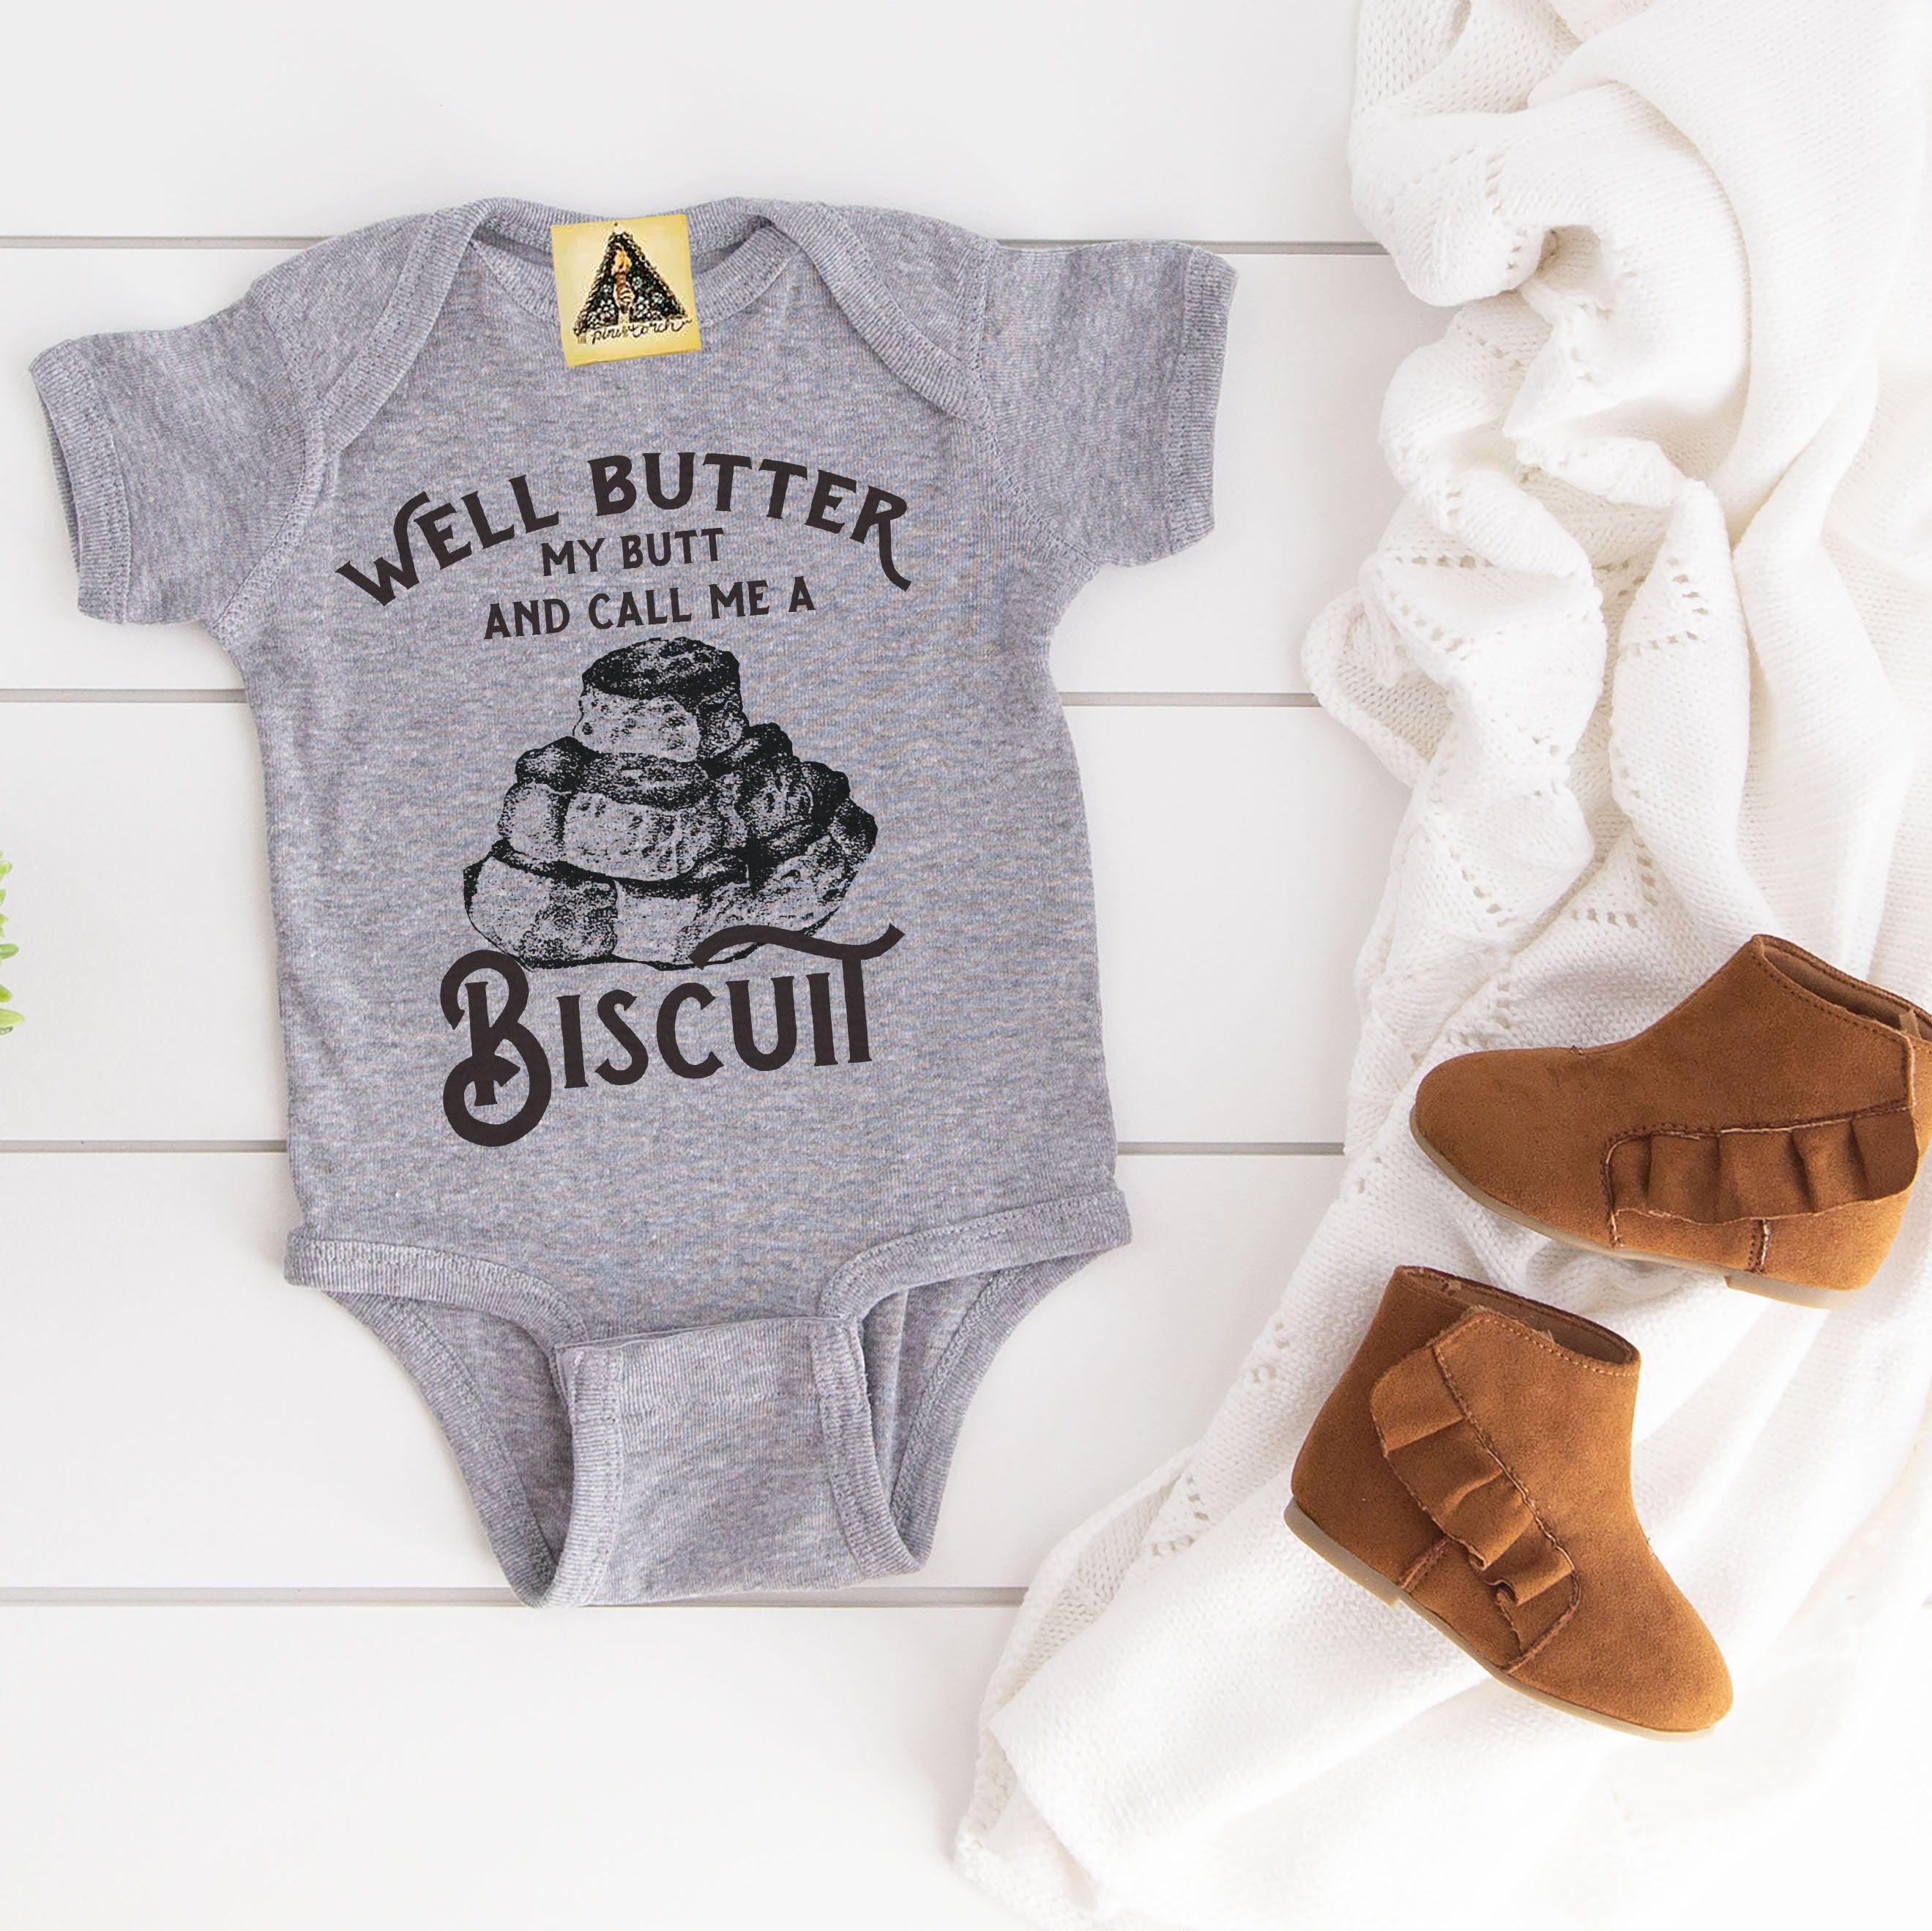 « BUTTER MY BUTT & CALL ME A BISCUIT » BODYSUIT